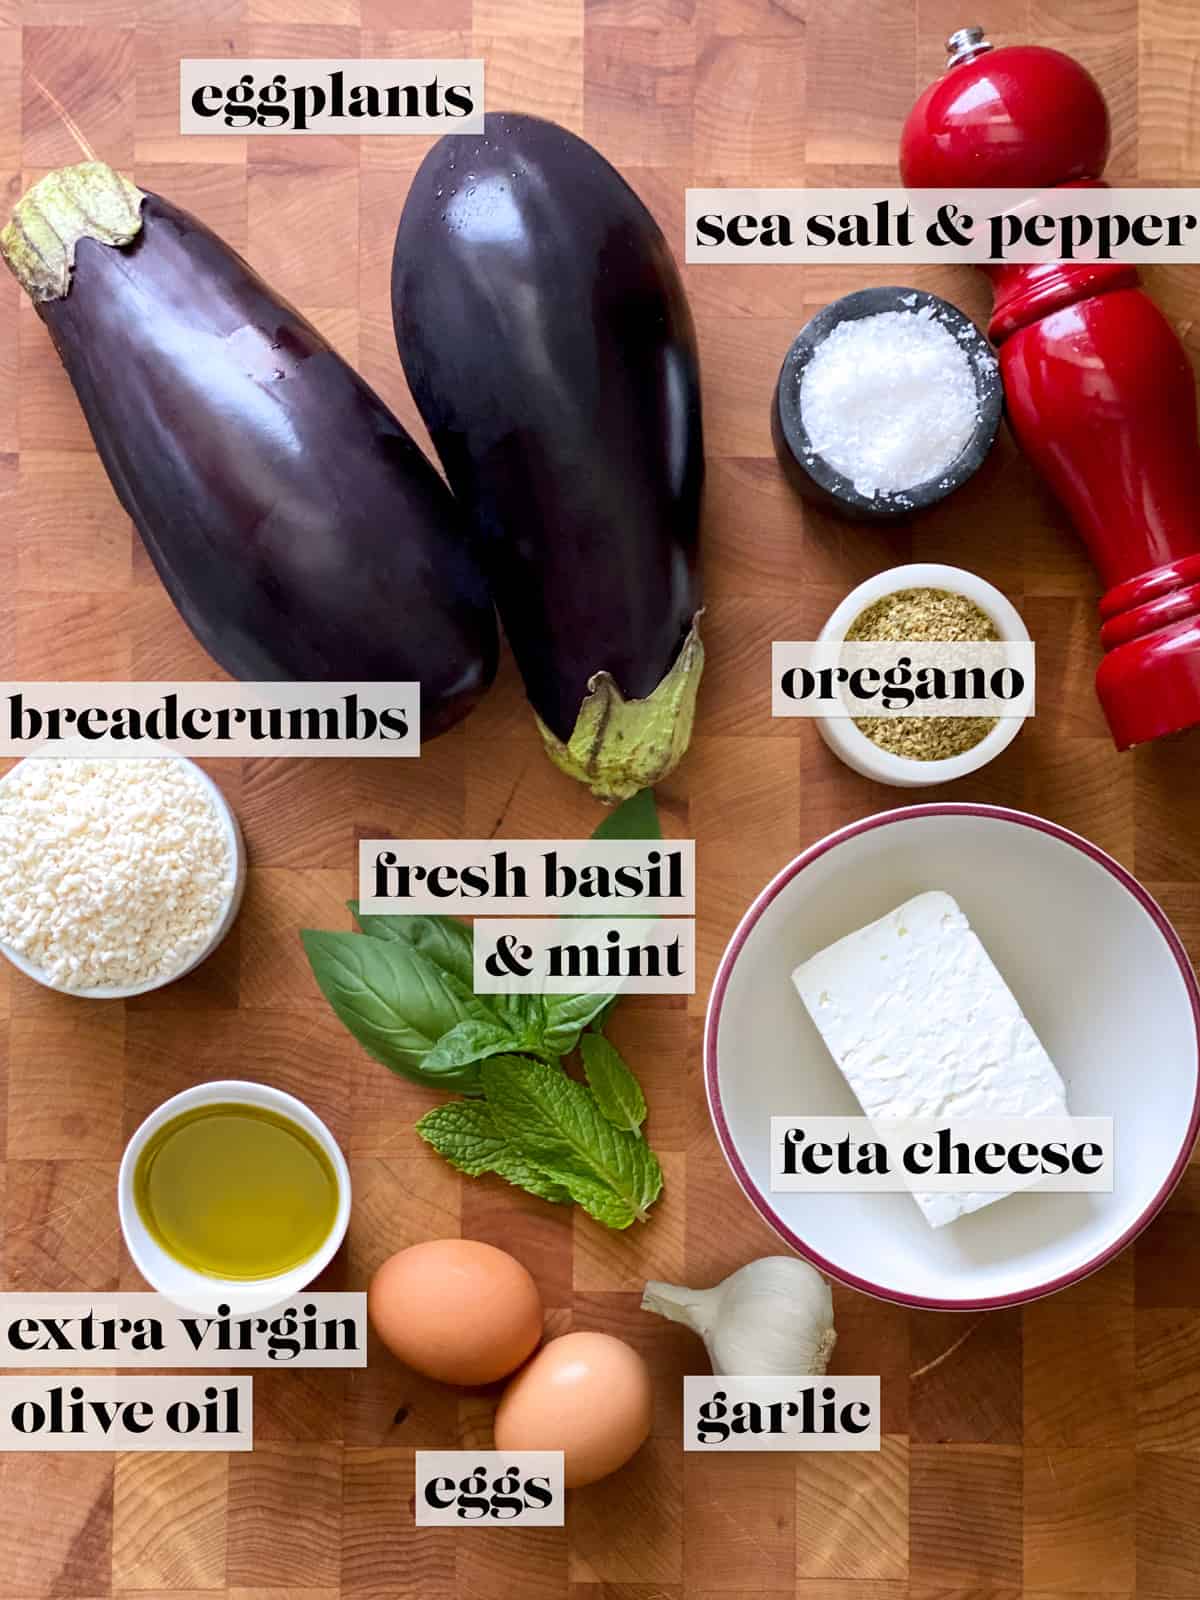 Ingredients for eggplant fritters. Eggplants, small containers with salt, oregano, olive oil, breadcrumbs. some herbs, two eggs and a pepper grinder.. A bowl with feta, 